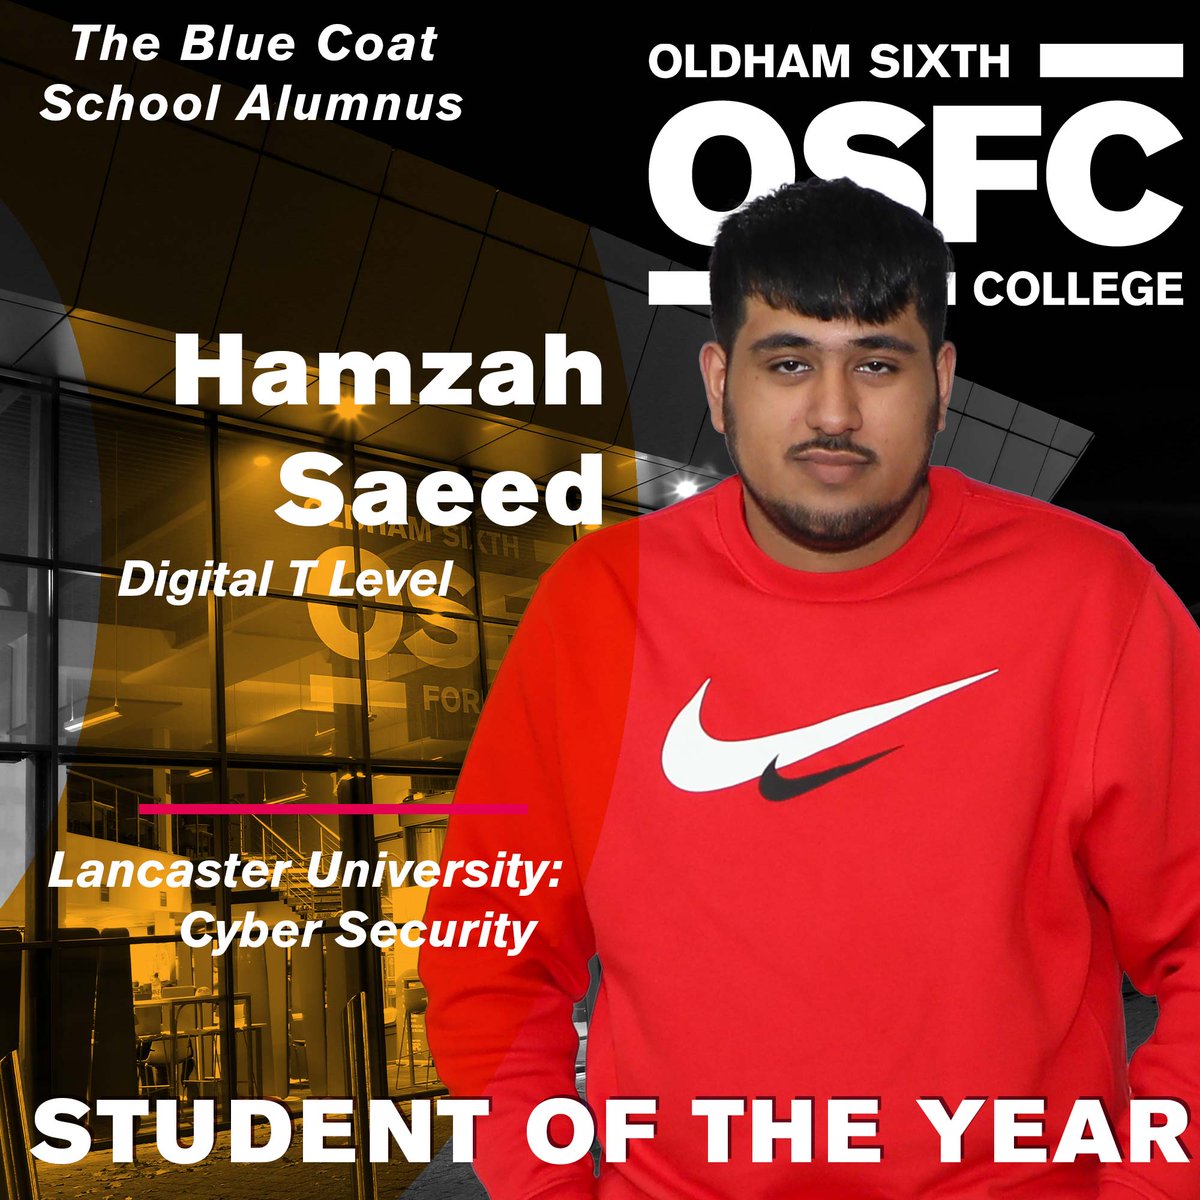 We are proud of our 2023 leavers and all that they achieved at OSFC! We hope you are enjoying your next steps after college, wherever that may have taken you! @OldhamAcademy @TeamWaterhead @saddleworth_ @BCOldham #WeAreOSFC #StudentSuccess #Alumni